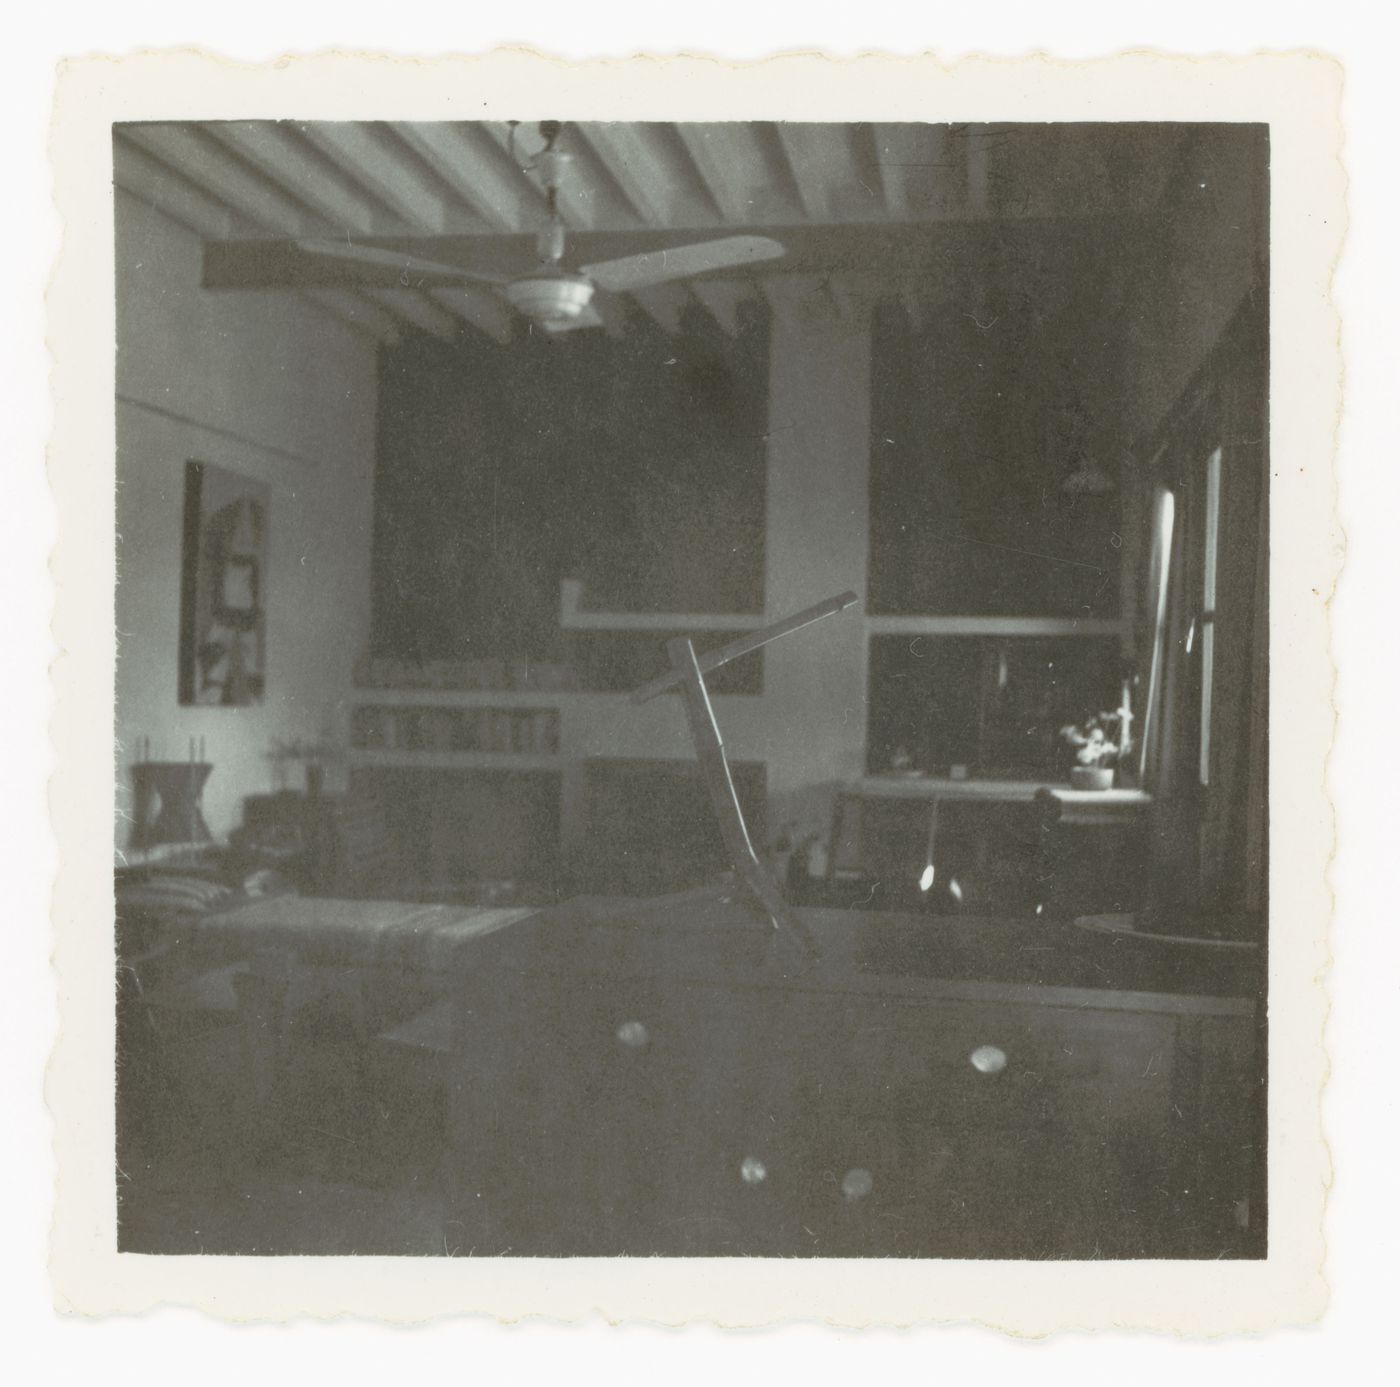 Interior view of Pierre Jeanneret's house, Sector 5, Chandigarh, India